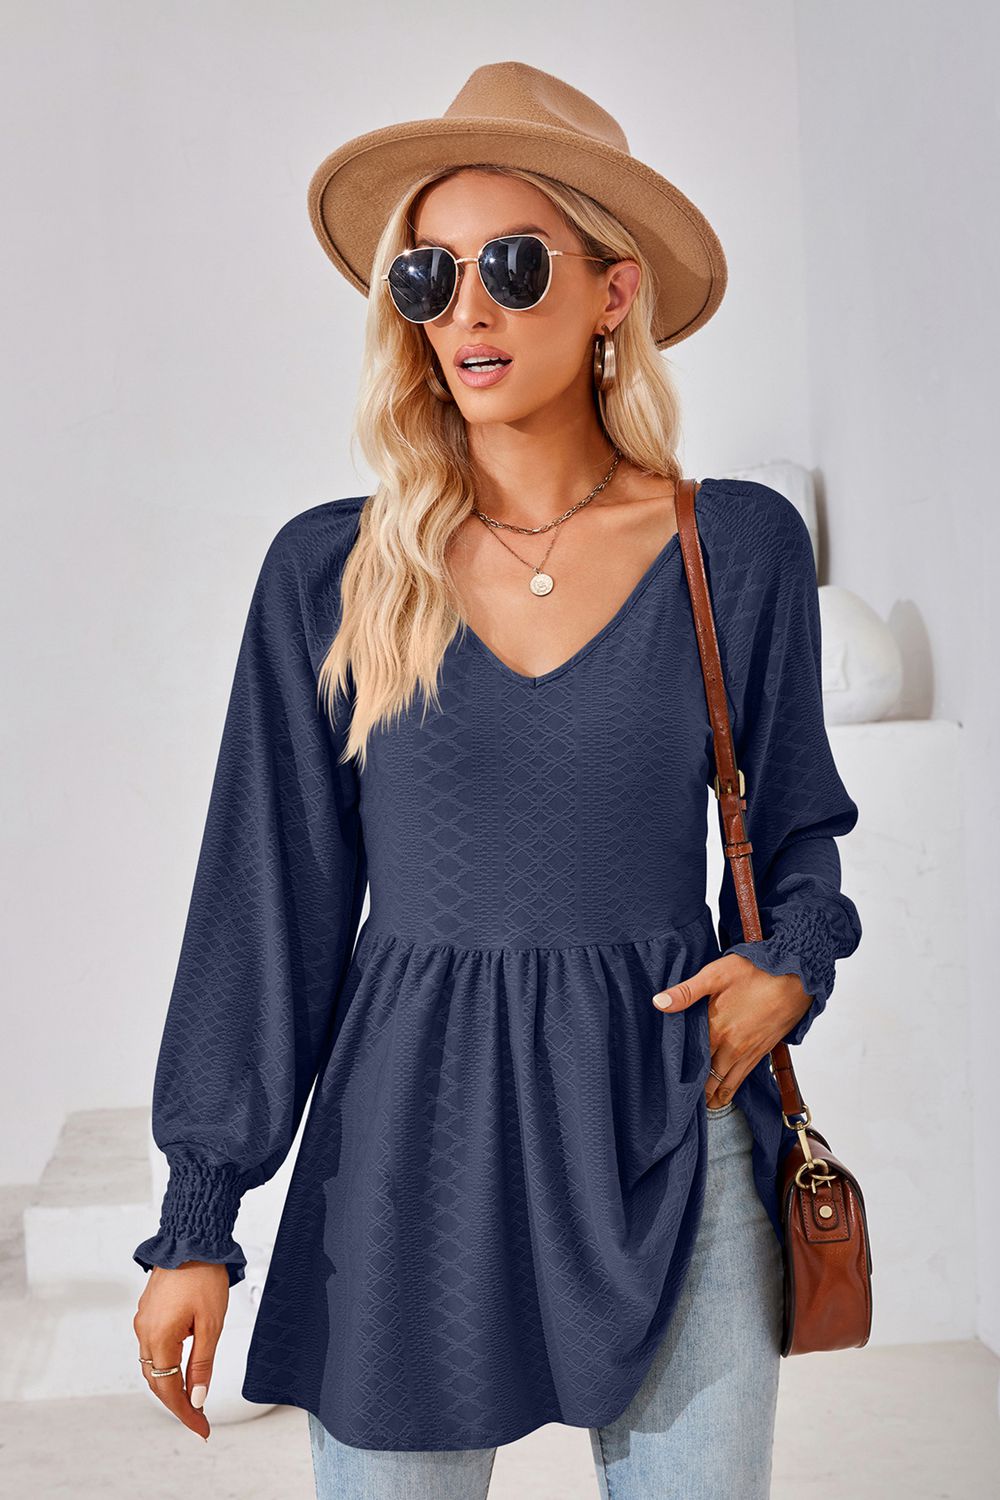 V-Neck Lantern Sleeve Blouse - Blue / S - Women’s Clothing & Accessories - Shirts & Tops - 25 - 2024